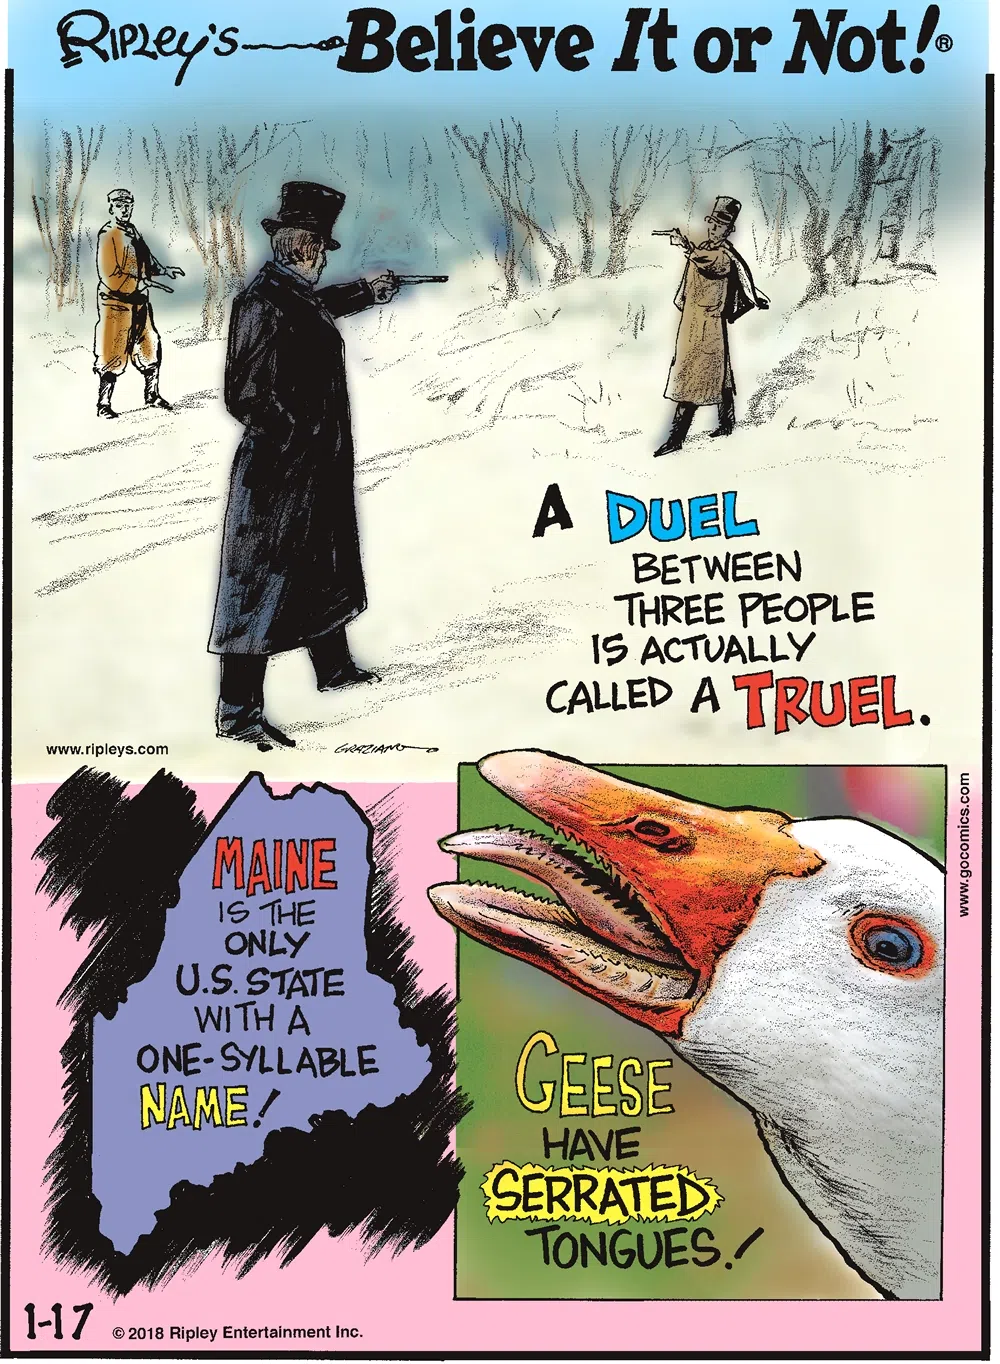 A duel between three people is actually called a truel.-------------------- Maine is the only U.S. state with a one-syllable name!-------------------- Geese have serrated tongues!